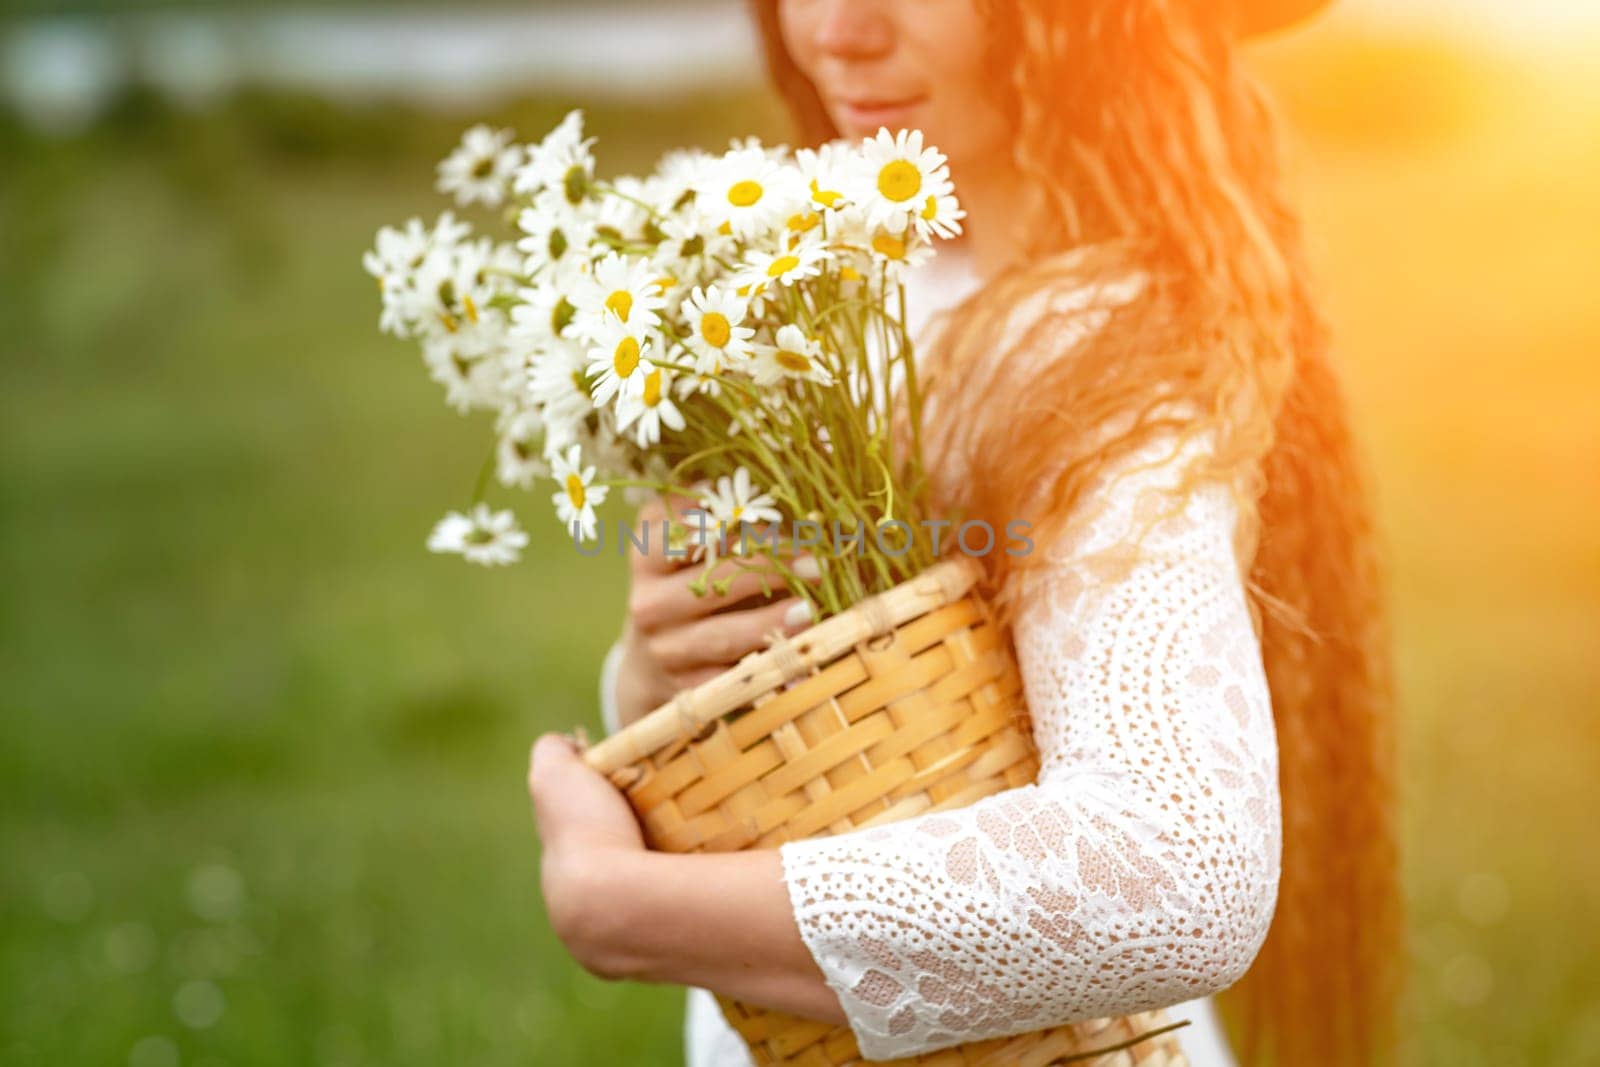 A middle-aged woman in a white dress and brown hat holds a lA middle-aged woman in a white dress and brown hat holds a basket in her hands with a large bouquet of daisies.arge bouquet of daisies in her hands. Wildflowers for congratulations.